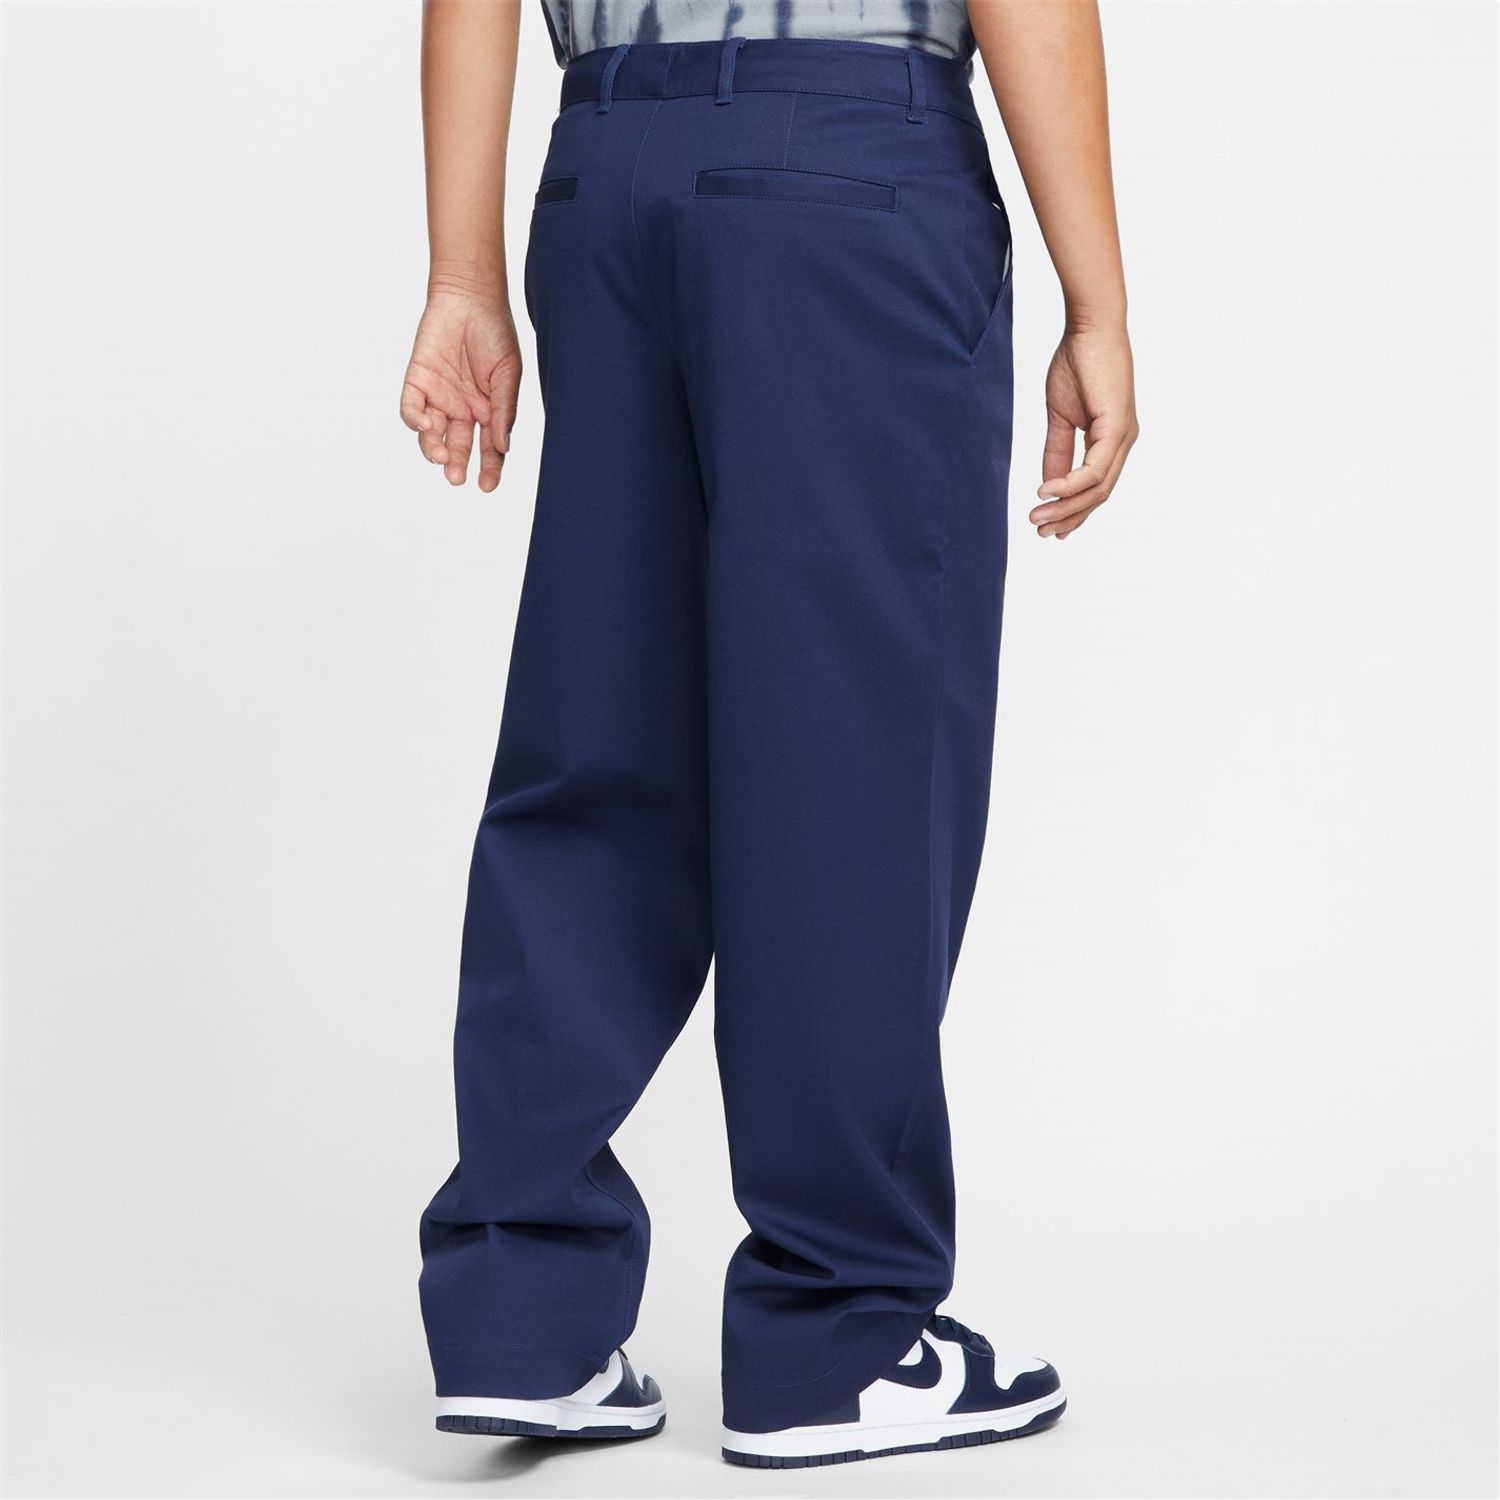 Blue Nike Chinos - Get The Label